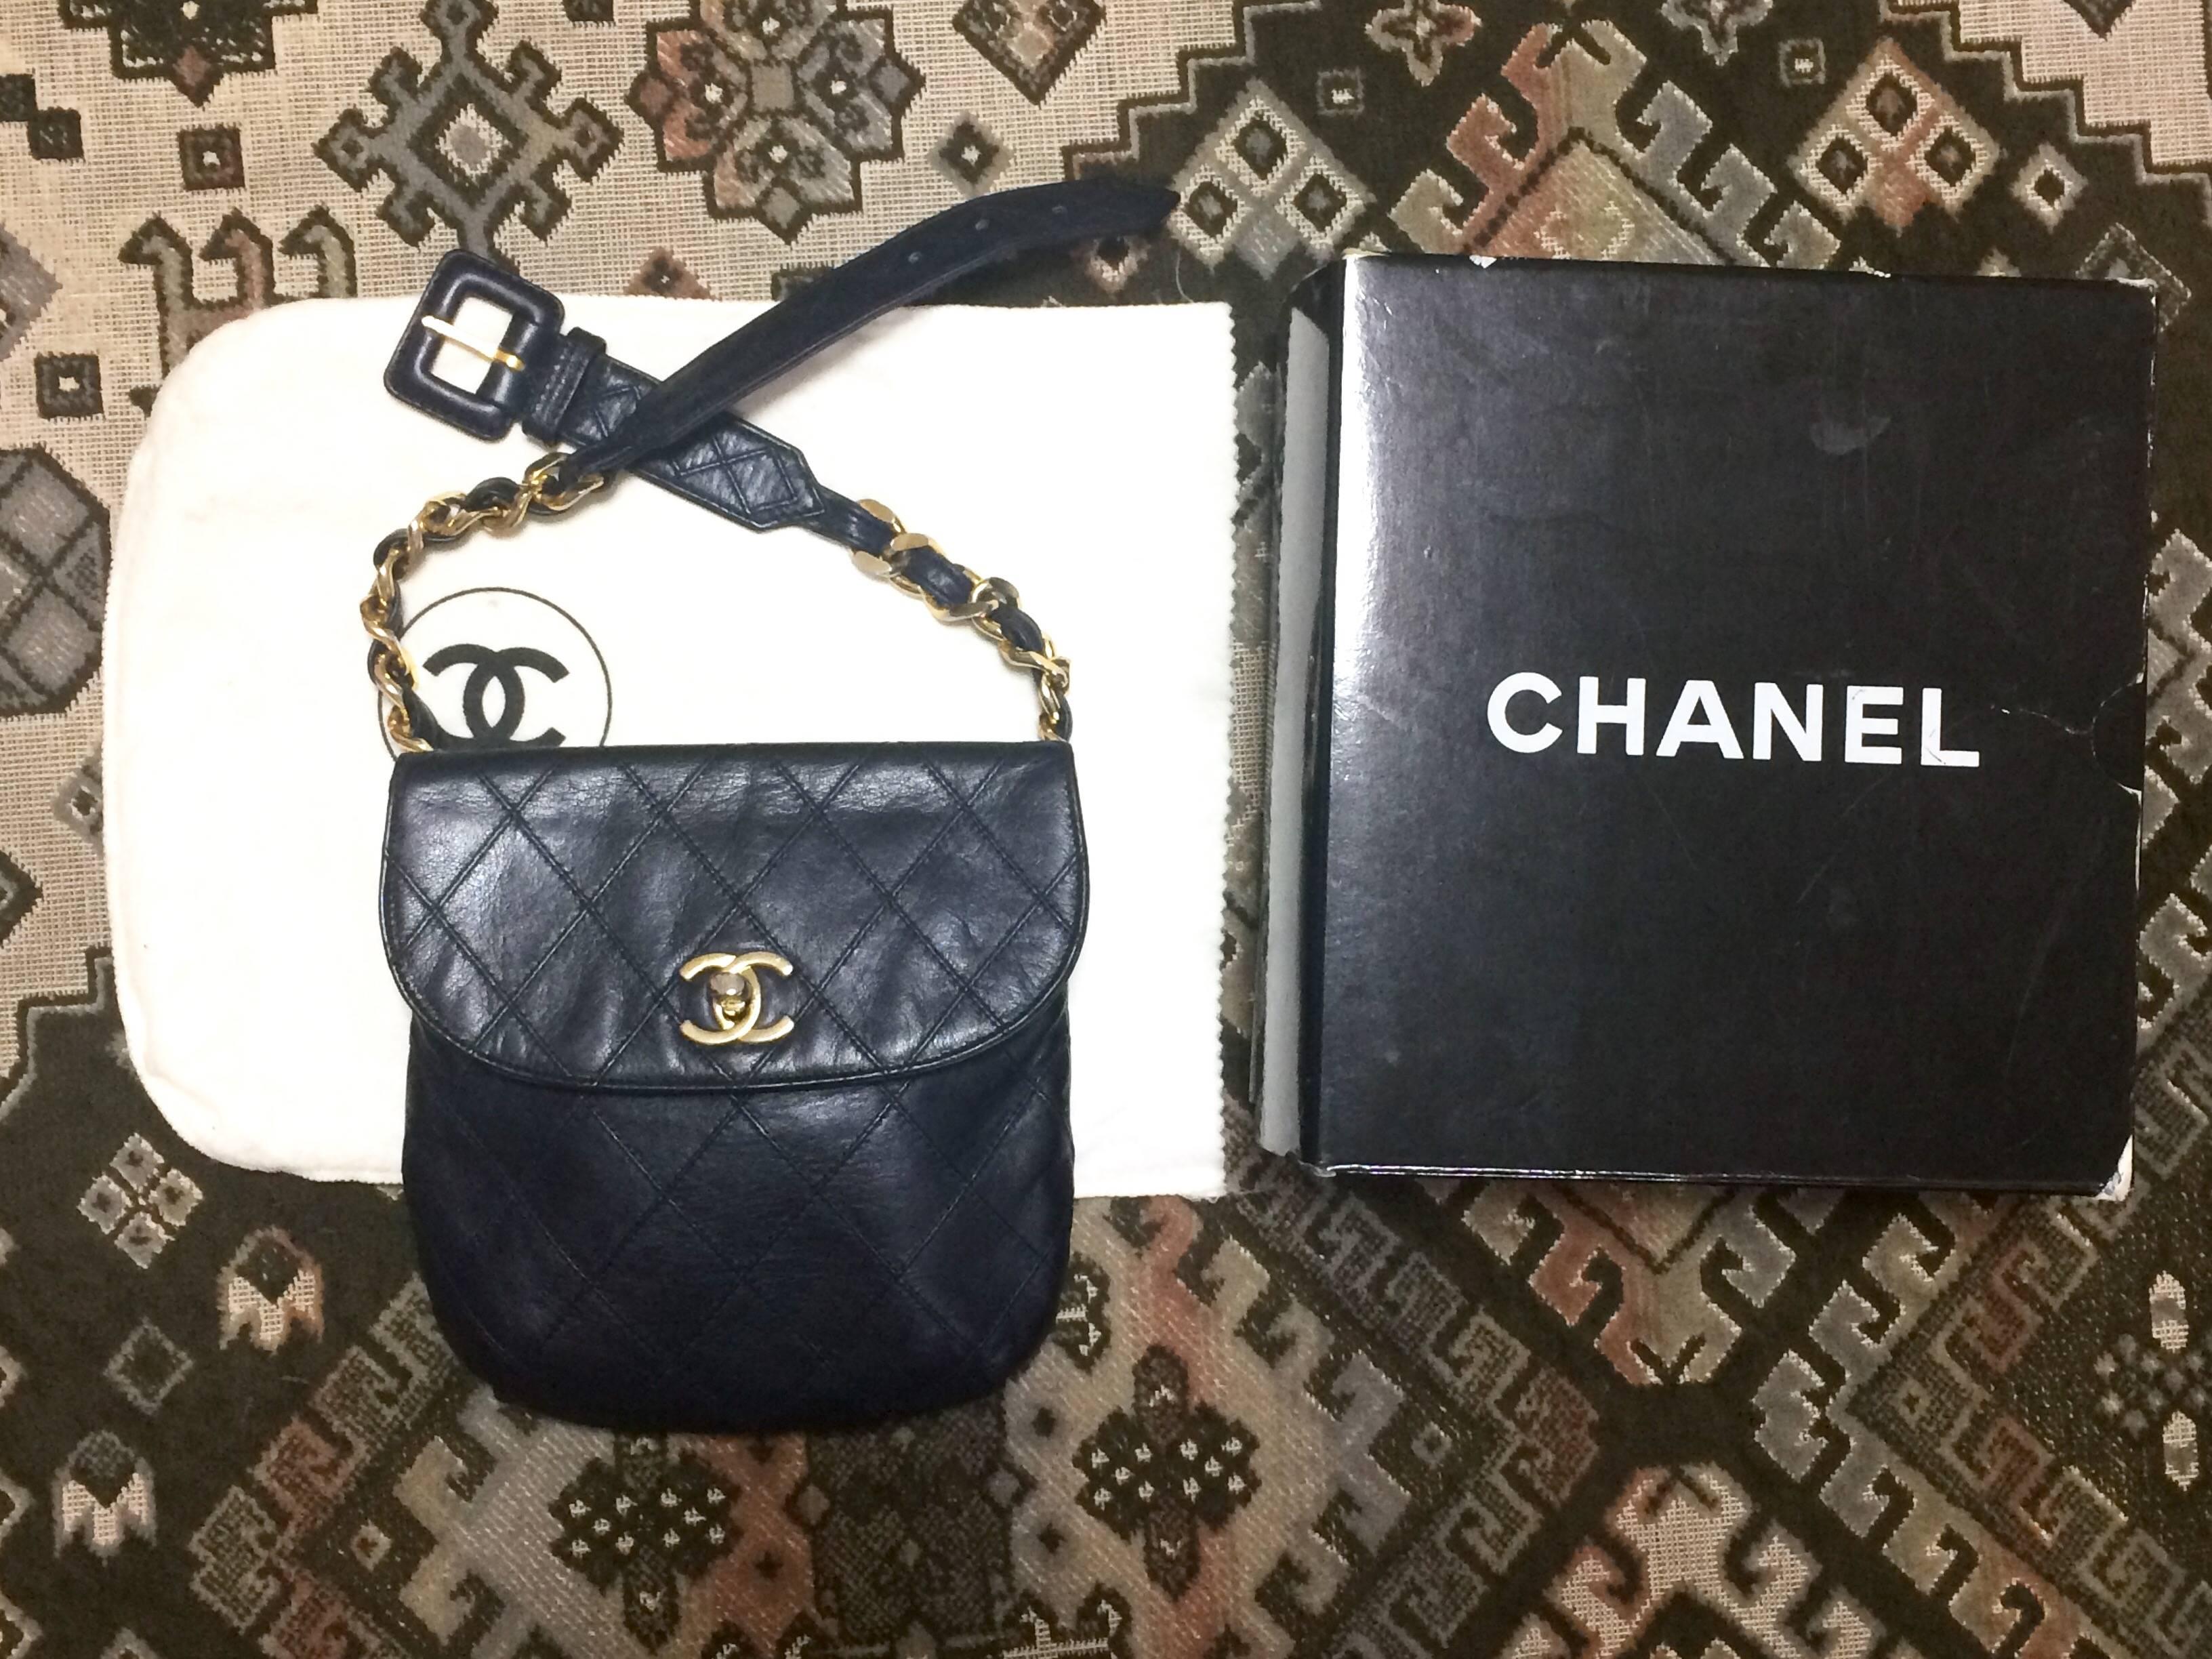 1990s. Vintage CHANEL dark navy leather waist purse, fanny pack with golden thick chain belt and CC closure hock. 24", 24.5", 25", 25.5", 26", and 26.5"(62cm through 68cm) .

Featuring a gold tone CC turn lock closure,